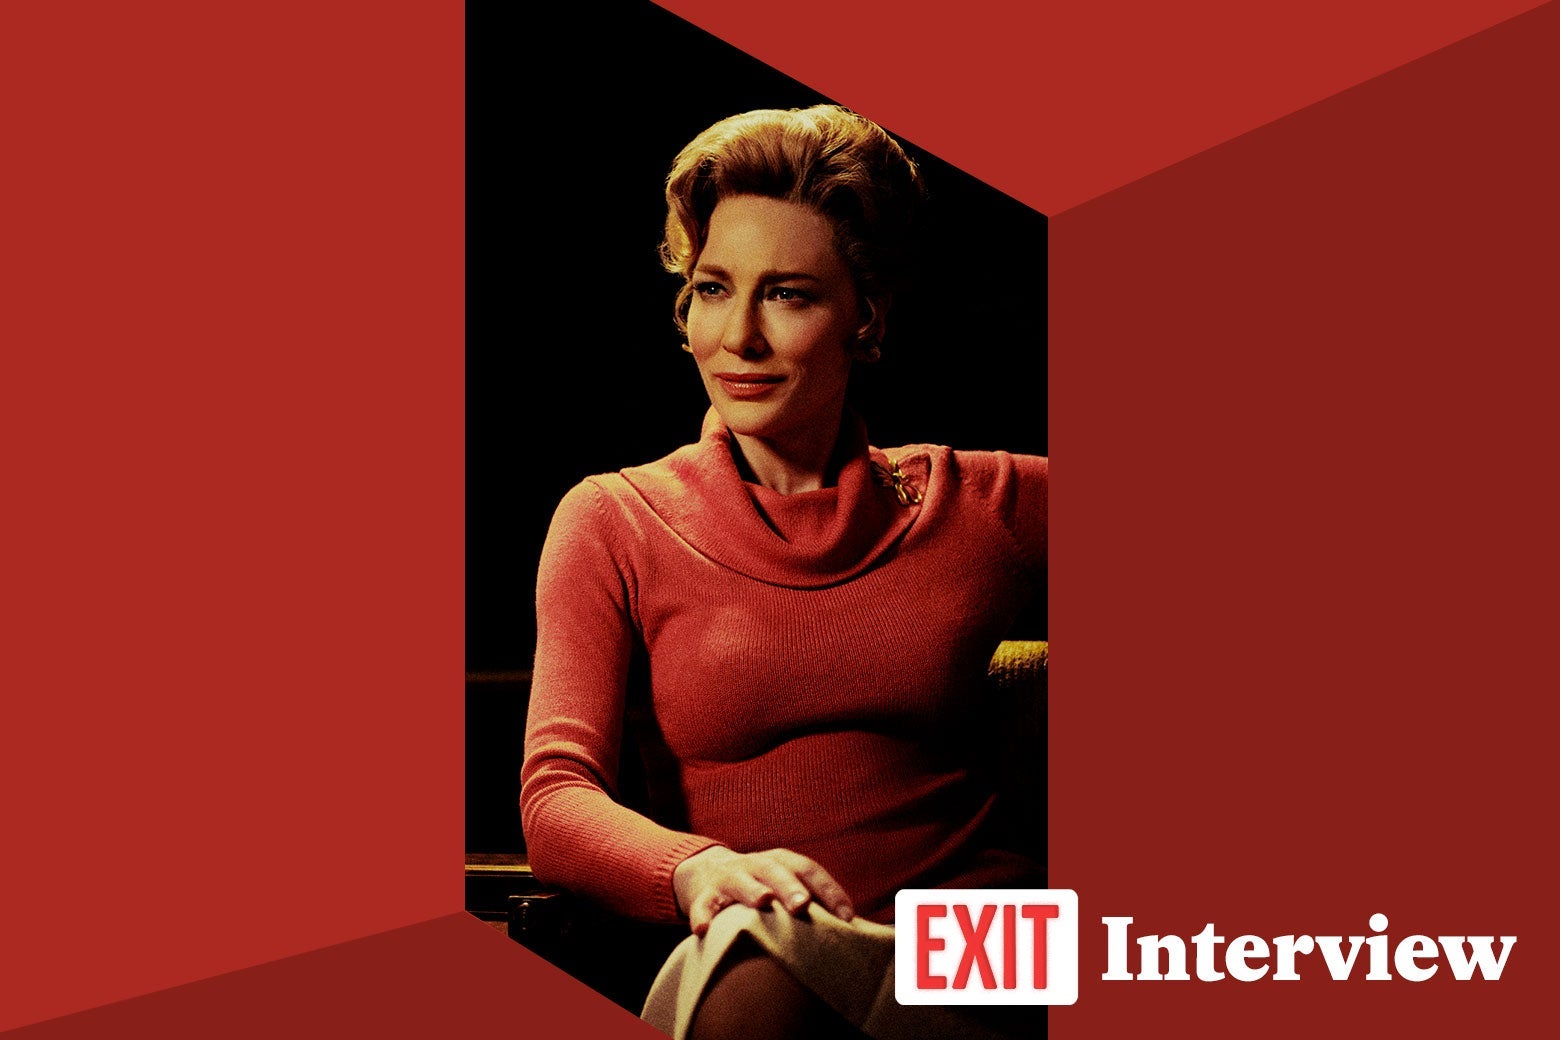 Cate Blanchett as Phyllis Schlafly in Mrs. America, with "Exit Interview" logo in the corner.